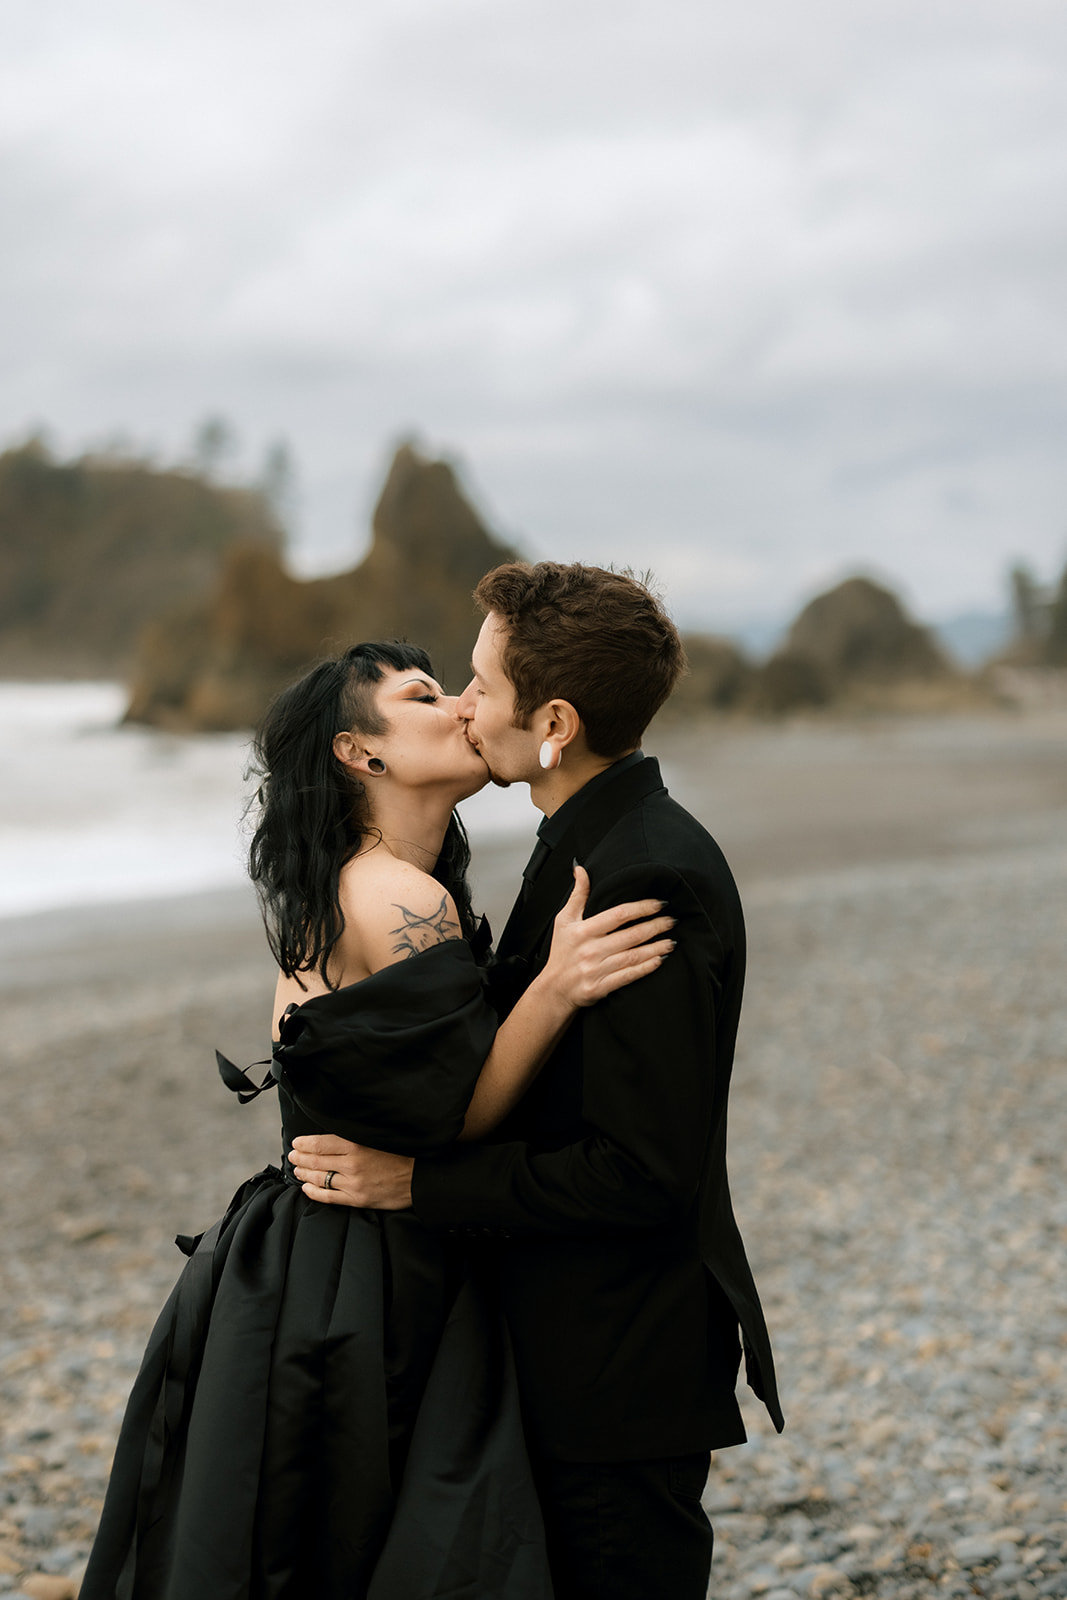 A couple in black wedding outfits kisses on a washington beach on a cloudy day.